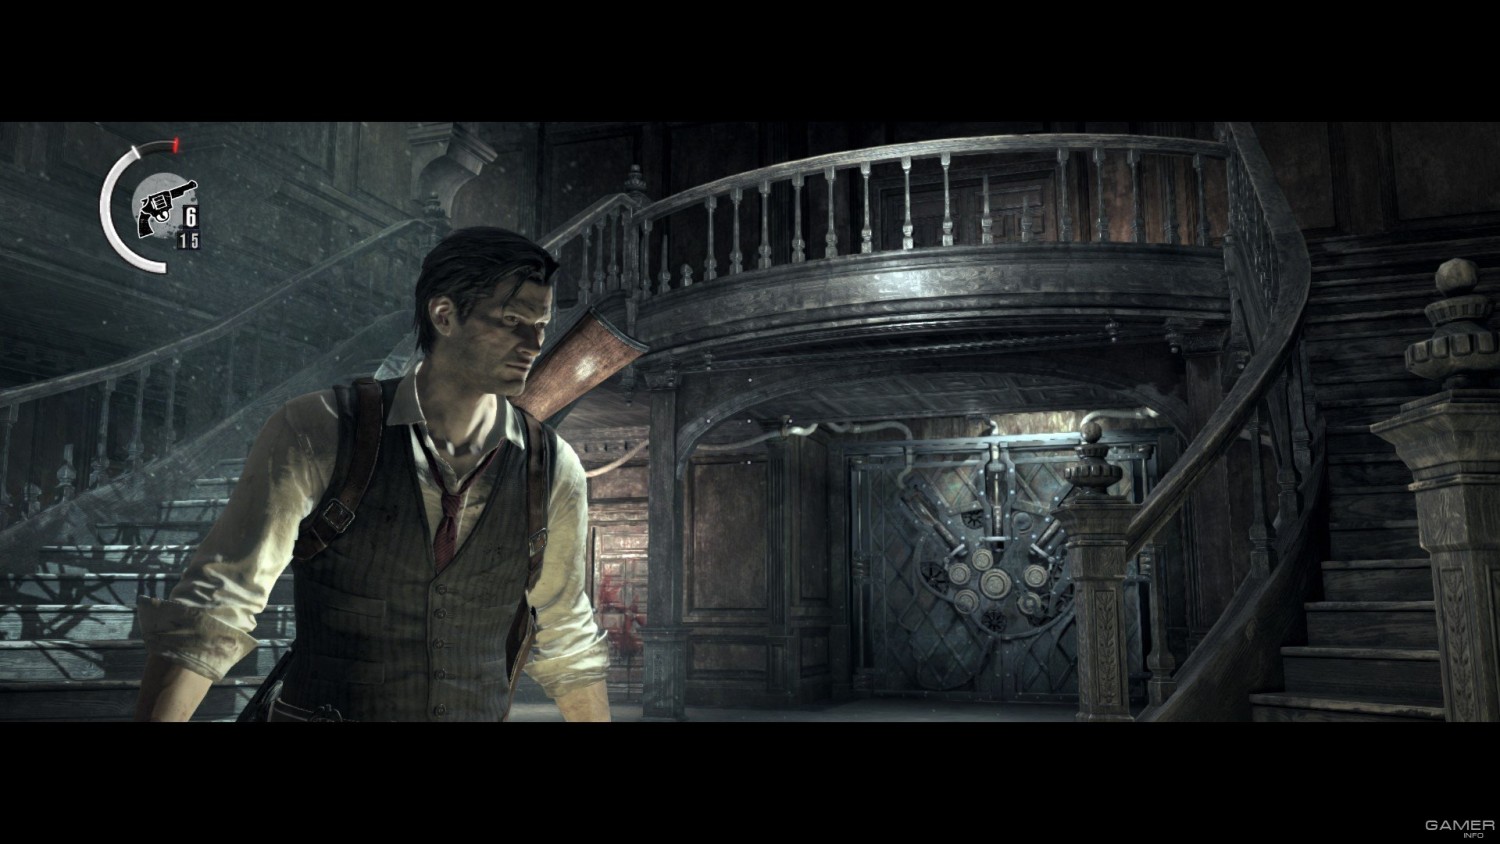 1634865650 26 Download The Evil Within 2014 torrent download for PC Download The Evil Within (2014) torrent download for PC